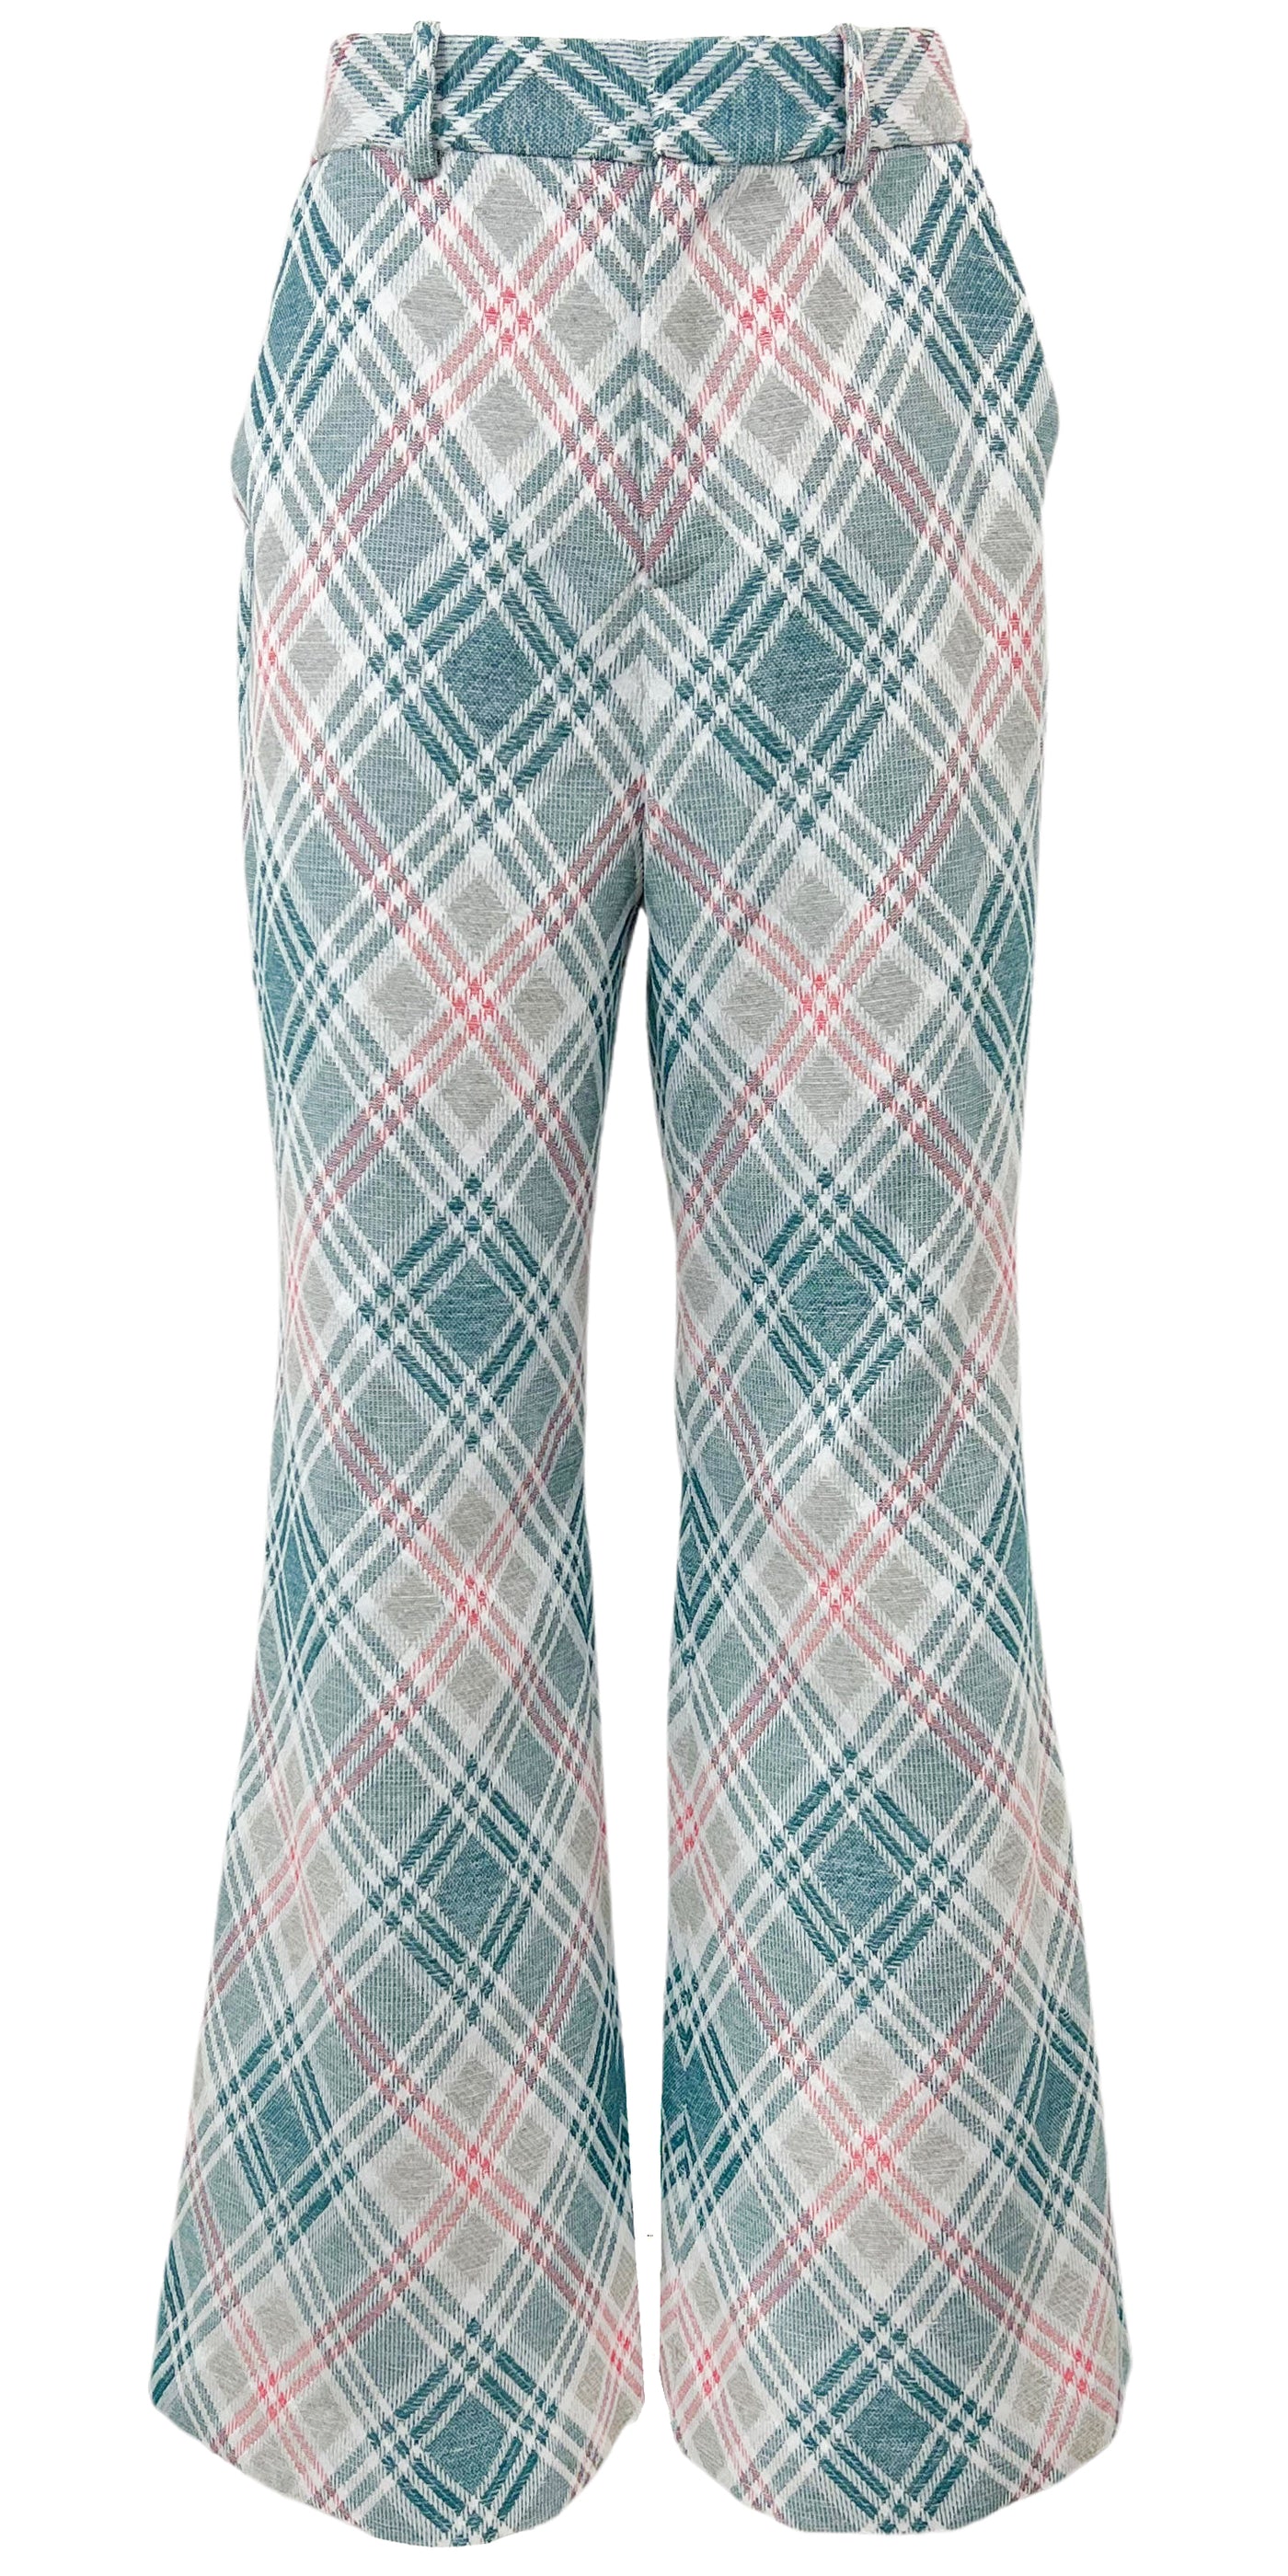 Rosie Assoulin Plaid Print Trousers in Multi - Discounts on Rosie Assoulin at UAL